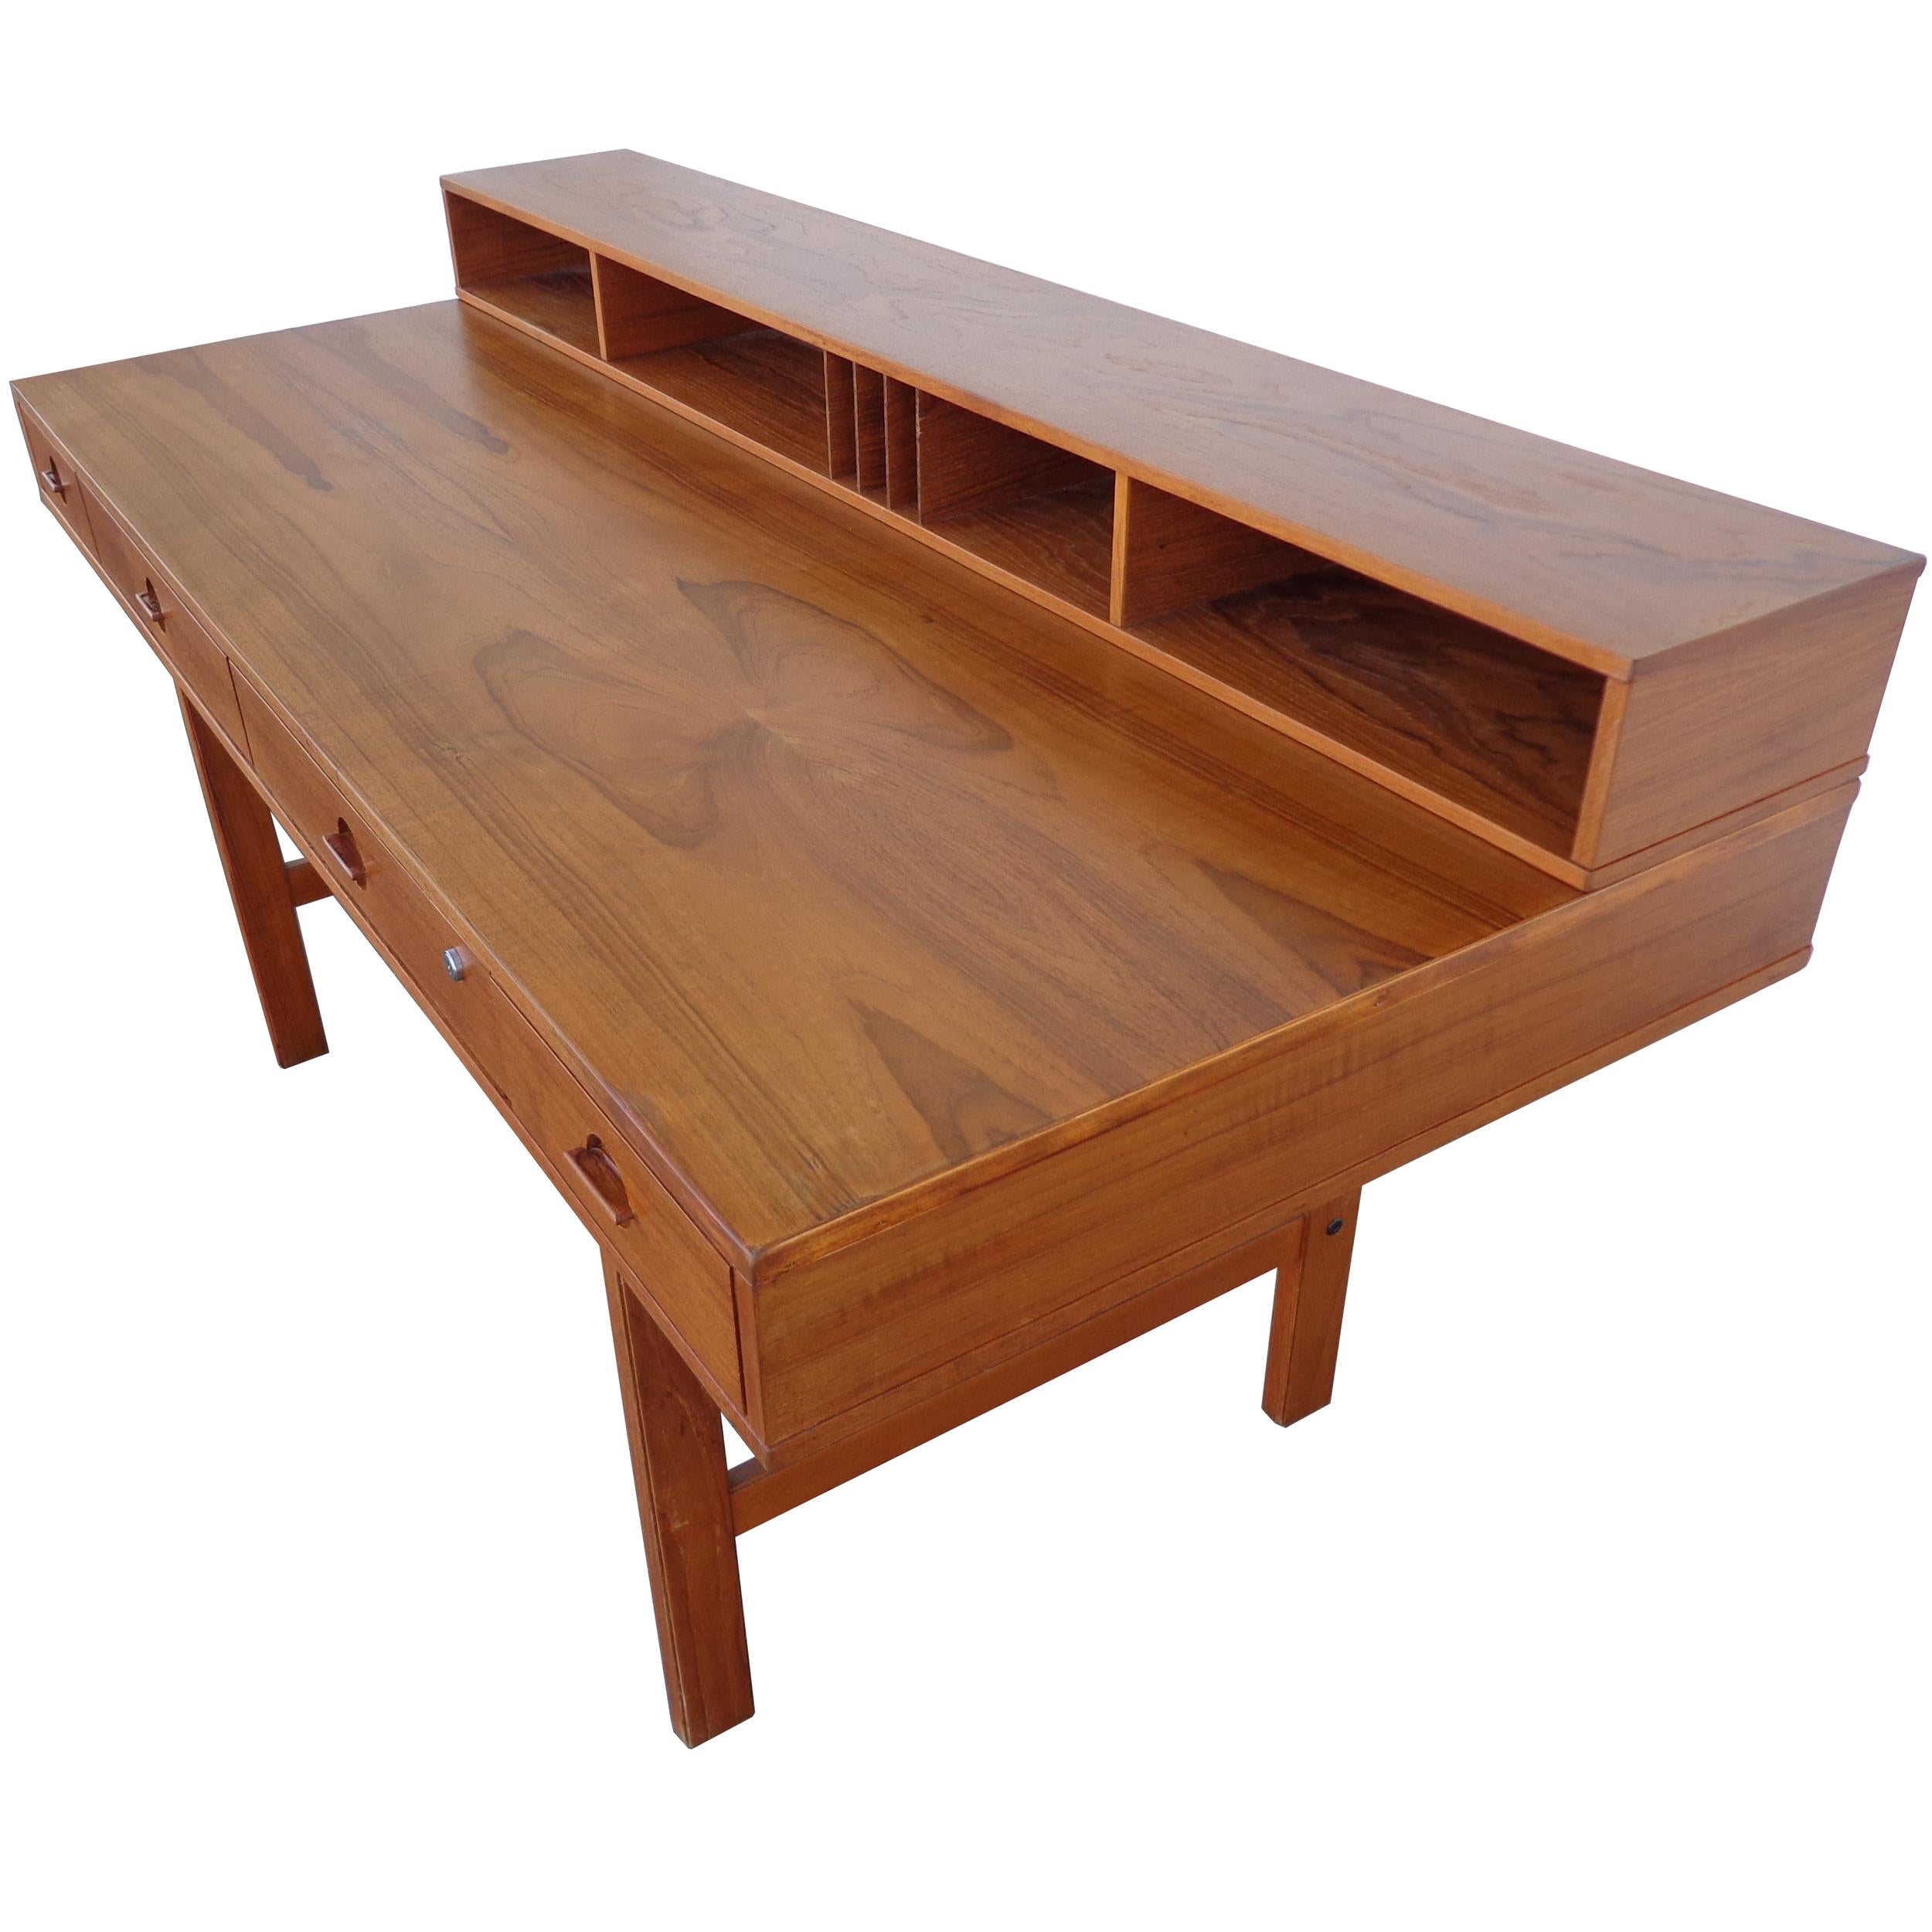 Peter Løvig Nielsen Flip-Top teak desk for Dansk Designs
circa 1970s 

Beautifully grained teak with unique flip top shelf flips down to extend the desk for more working space and can be used as a partner’s desk. Restored.

Down:
64? Width x